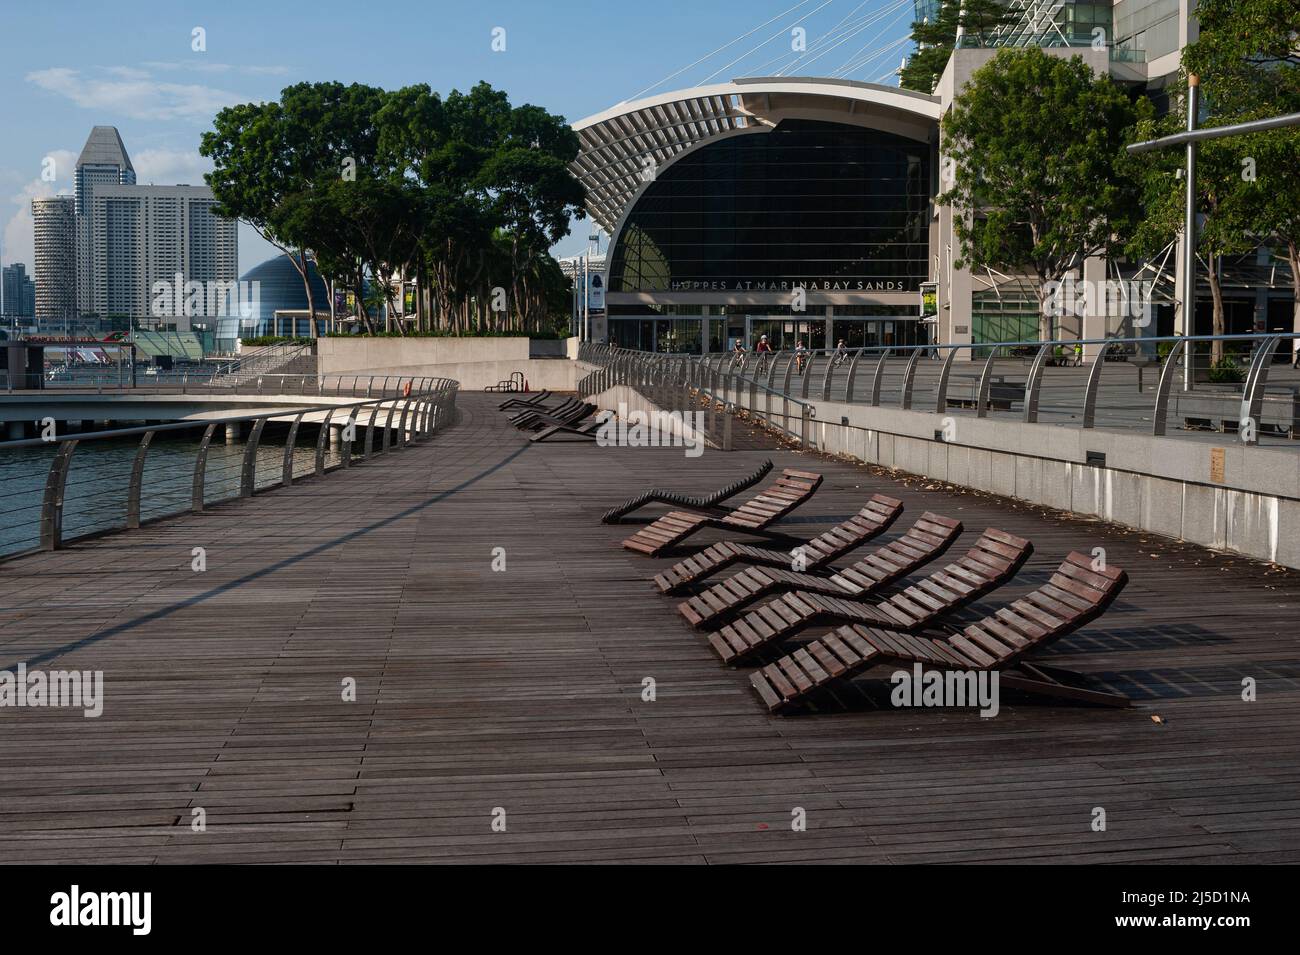 25.05.2021, Singapore, Republic of Singapore, Asia - Empty deck chairs along the waterfront in Marina Bay during the ongoing Corona crisis and The Shoppes shopping mall at Marina Bay Sands in the background, shortly after a new wave of infection has returned the Southeast Asian country to a lockdown-like state. This has resulted in further restrictions such as stricter border measures and entry requirements coupled with mandatory pre-testing and a negative test result on departure for all locals and permanent residents, as well as the closure of all elementary school, a ban on restaurant Stock Photo